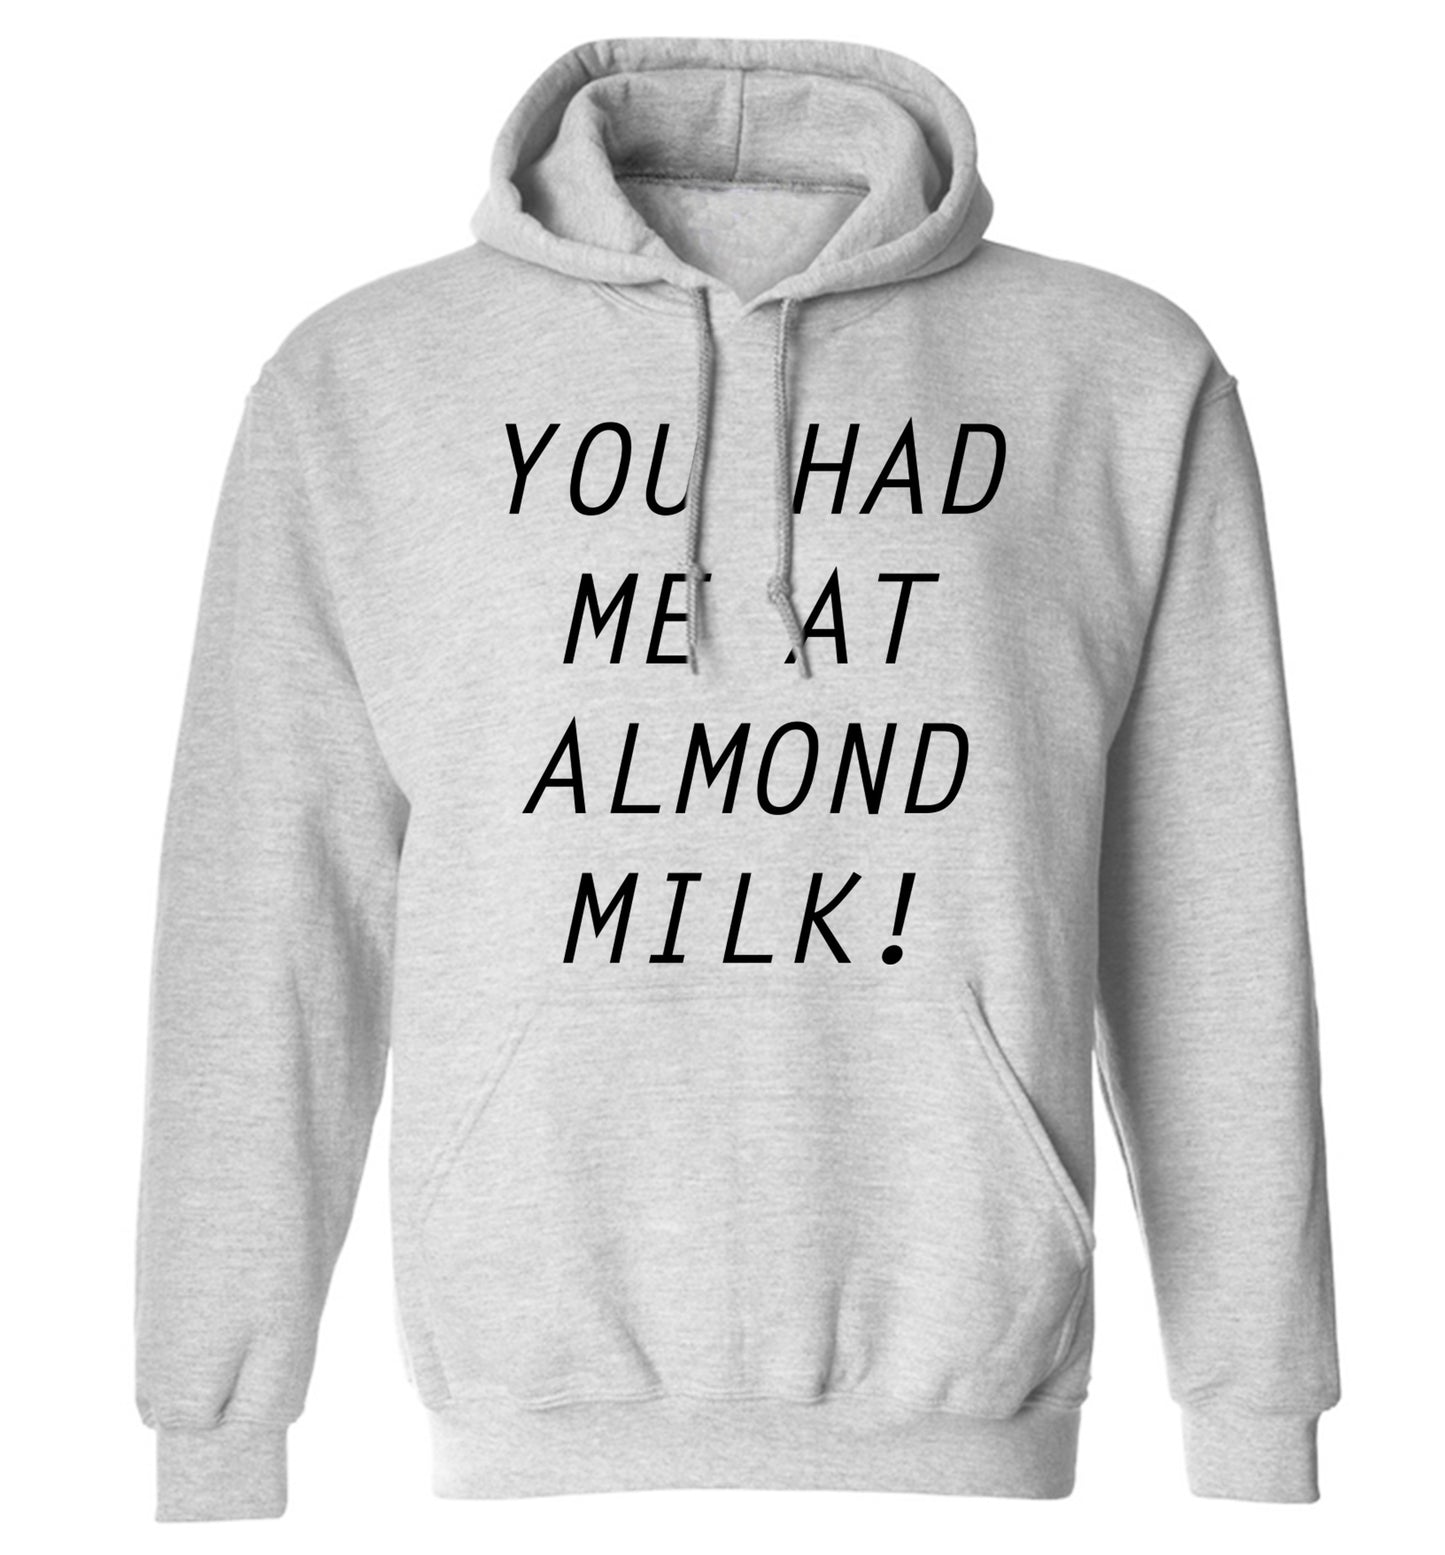 You had me at almond milk adults unisex grey hoodie 2XL